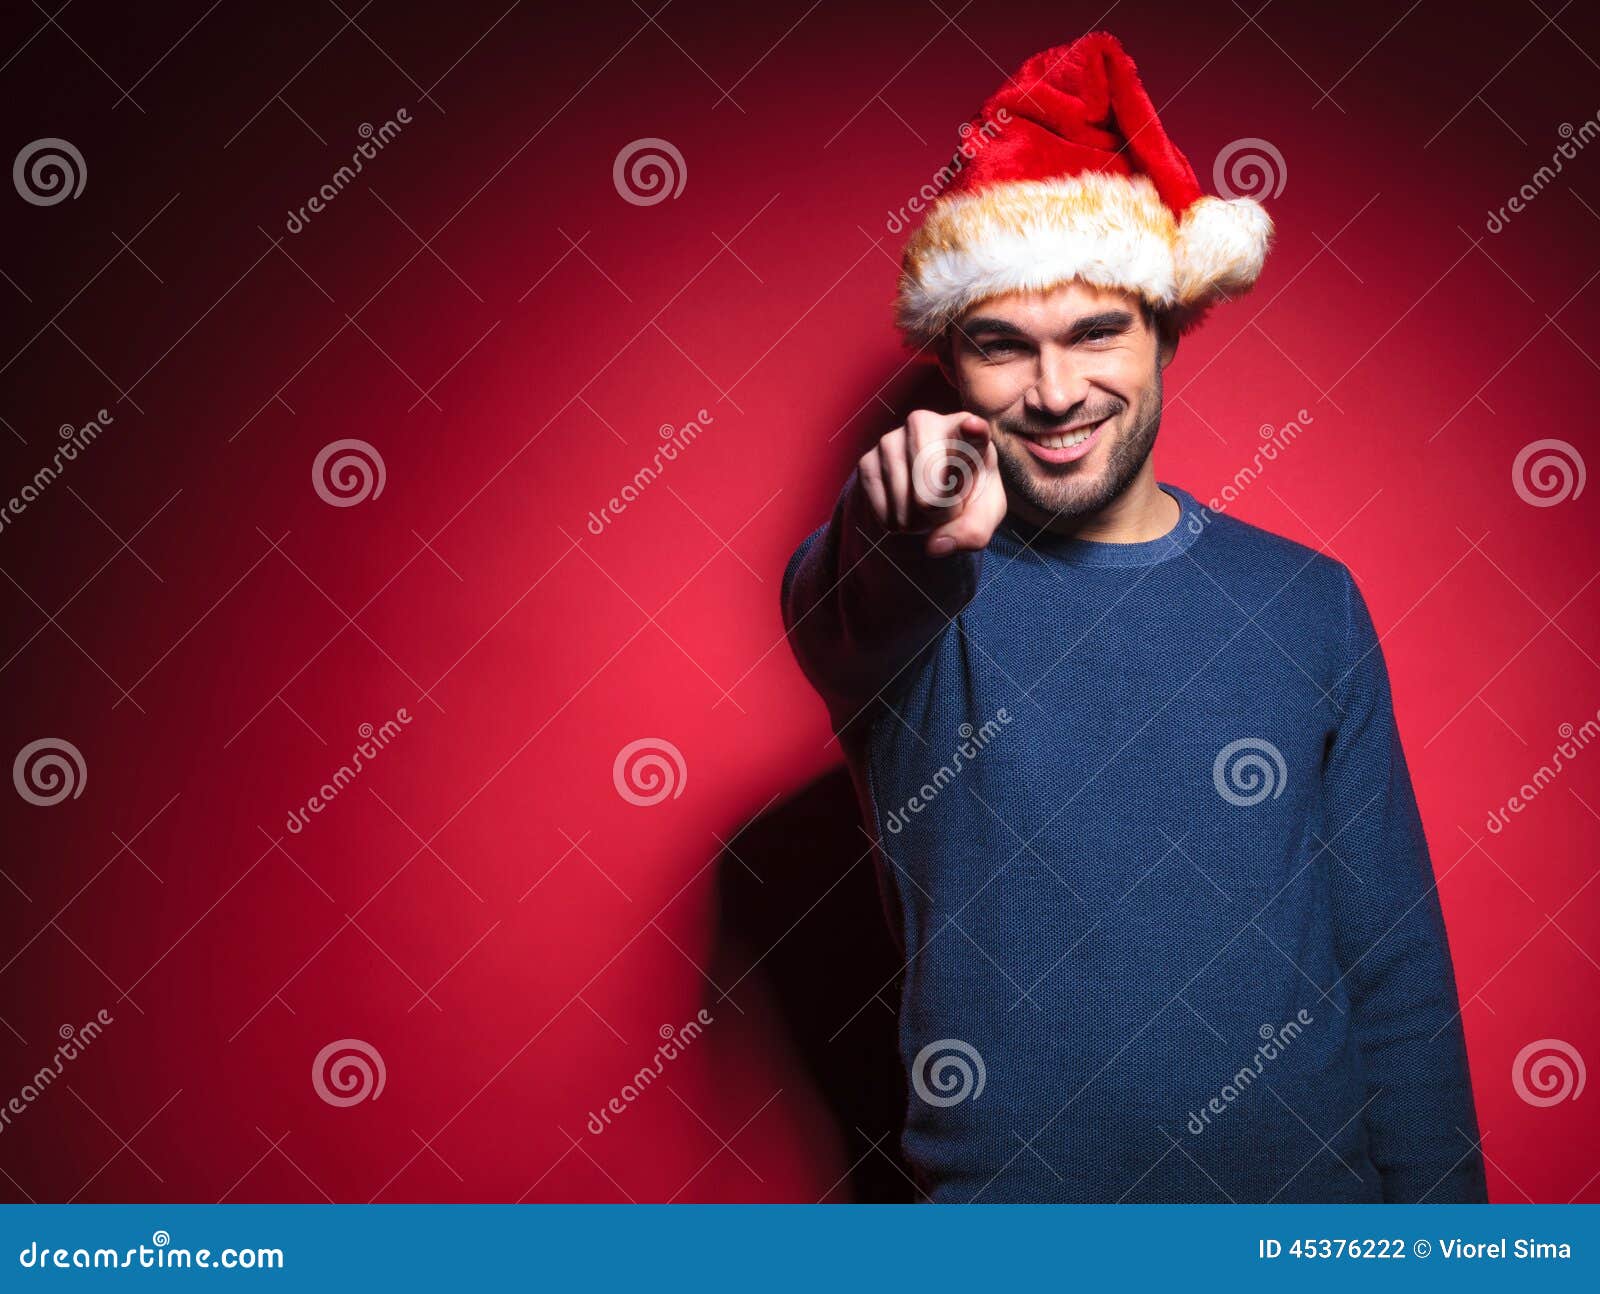 Smiling young santa pointing at you against red background.